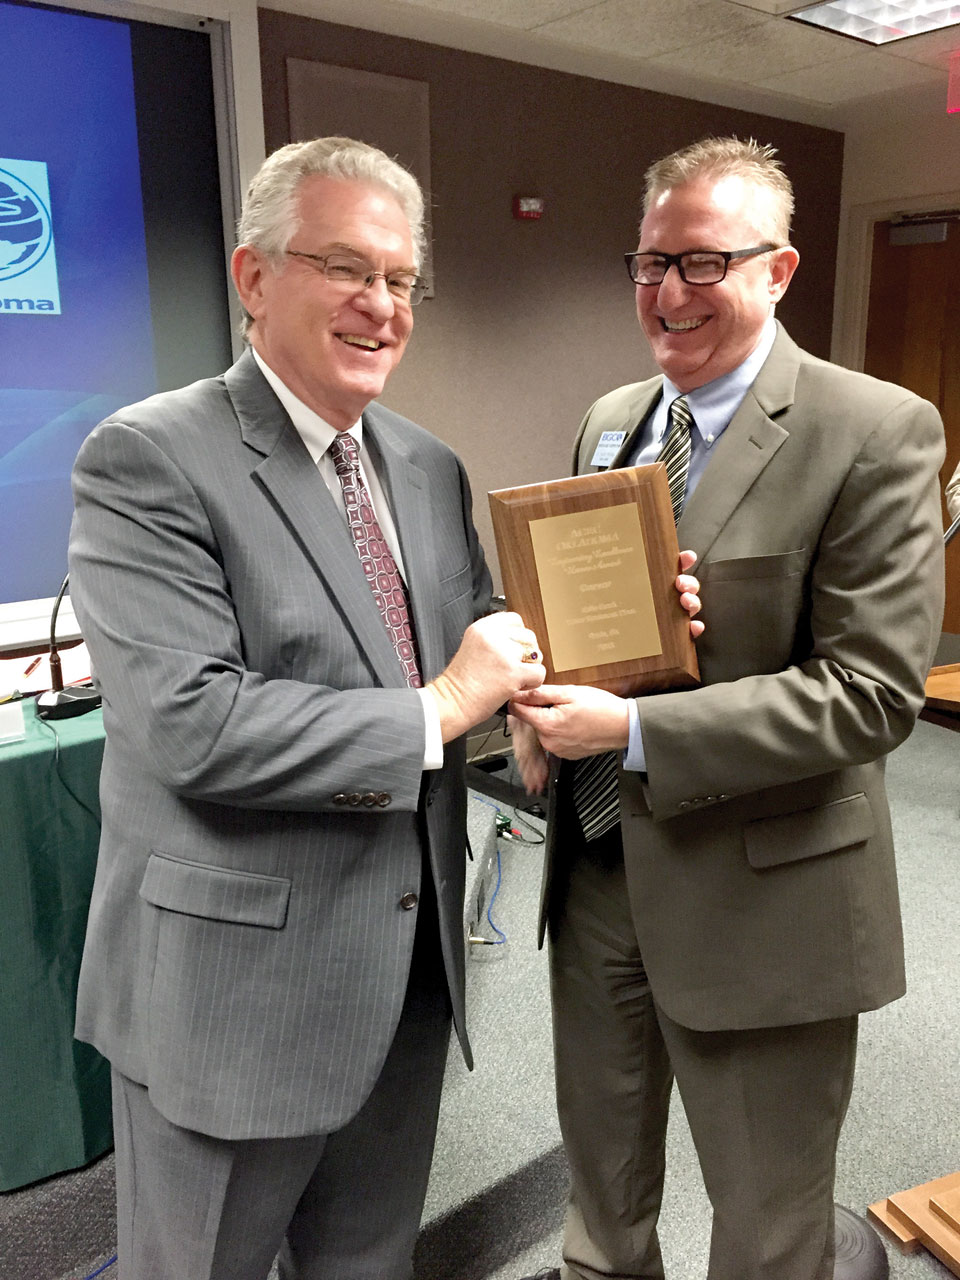 Anthony L. Jordan, BGCO executive director-treasurer, accepts an award from a national professional engineering society for excellence in design of the new Falls Creek wastewater treatment facility from Operations Team leader D. Scott Phillips, who has been overseeing Falls Creek construction and projects (Photo: Brian Hobbs)